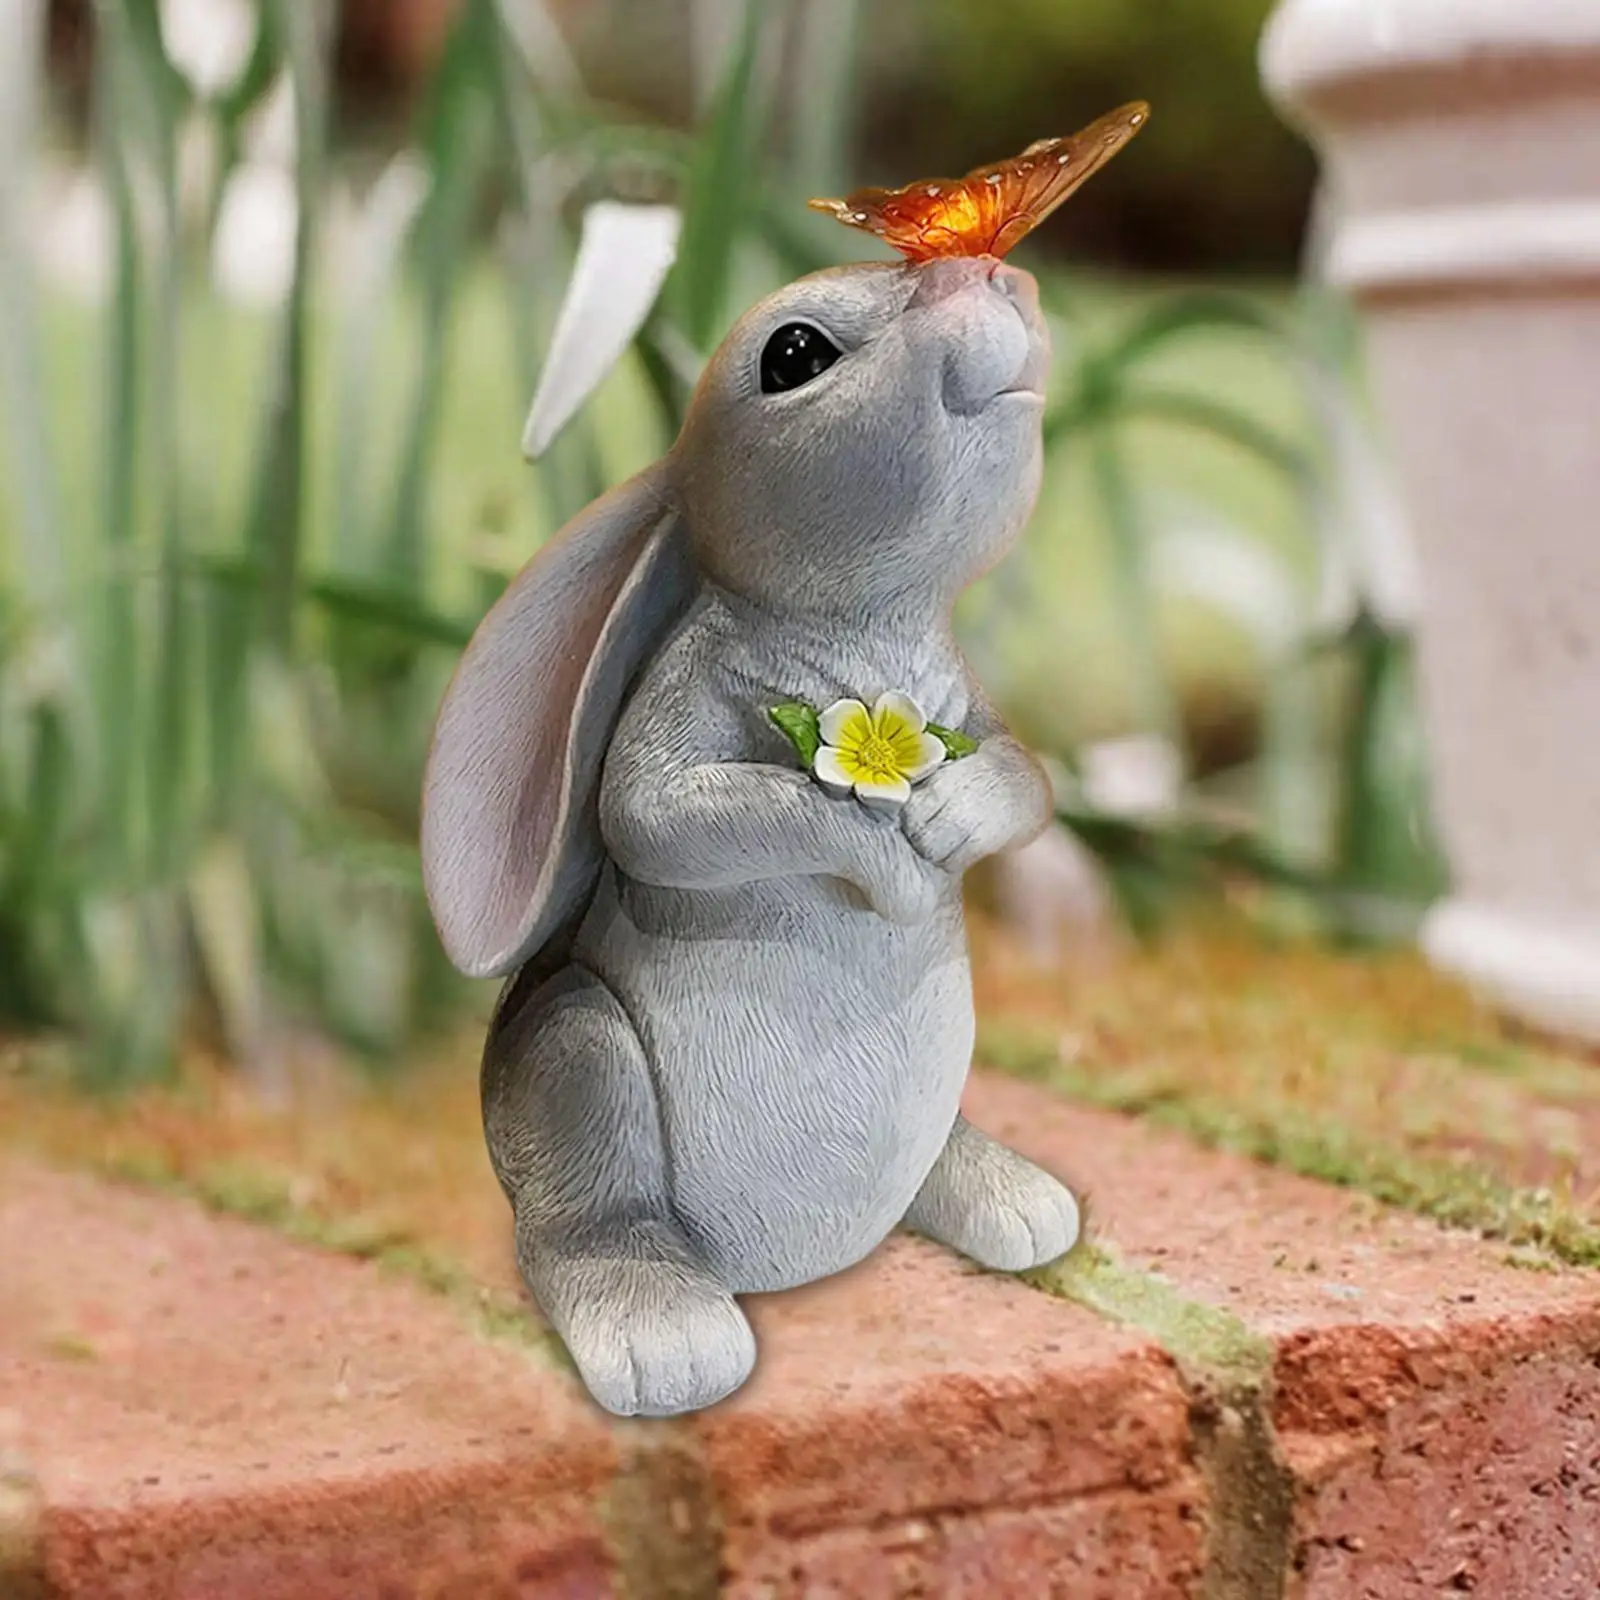 Solar Garden Rabbit Ornament Animal Figurine with Glowing Butterfly Resin Decoration Creative Crafts for Garden Porch Patio Lawn